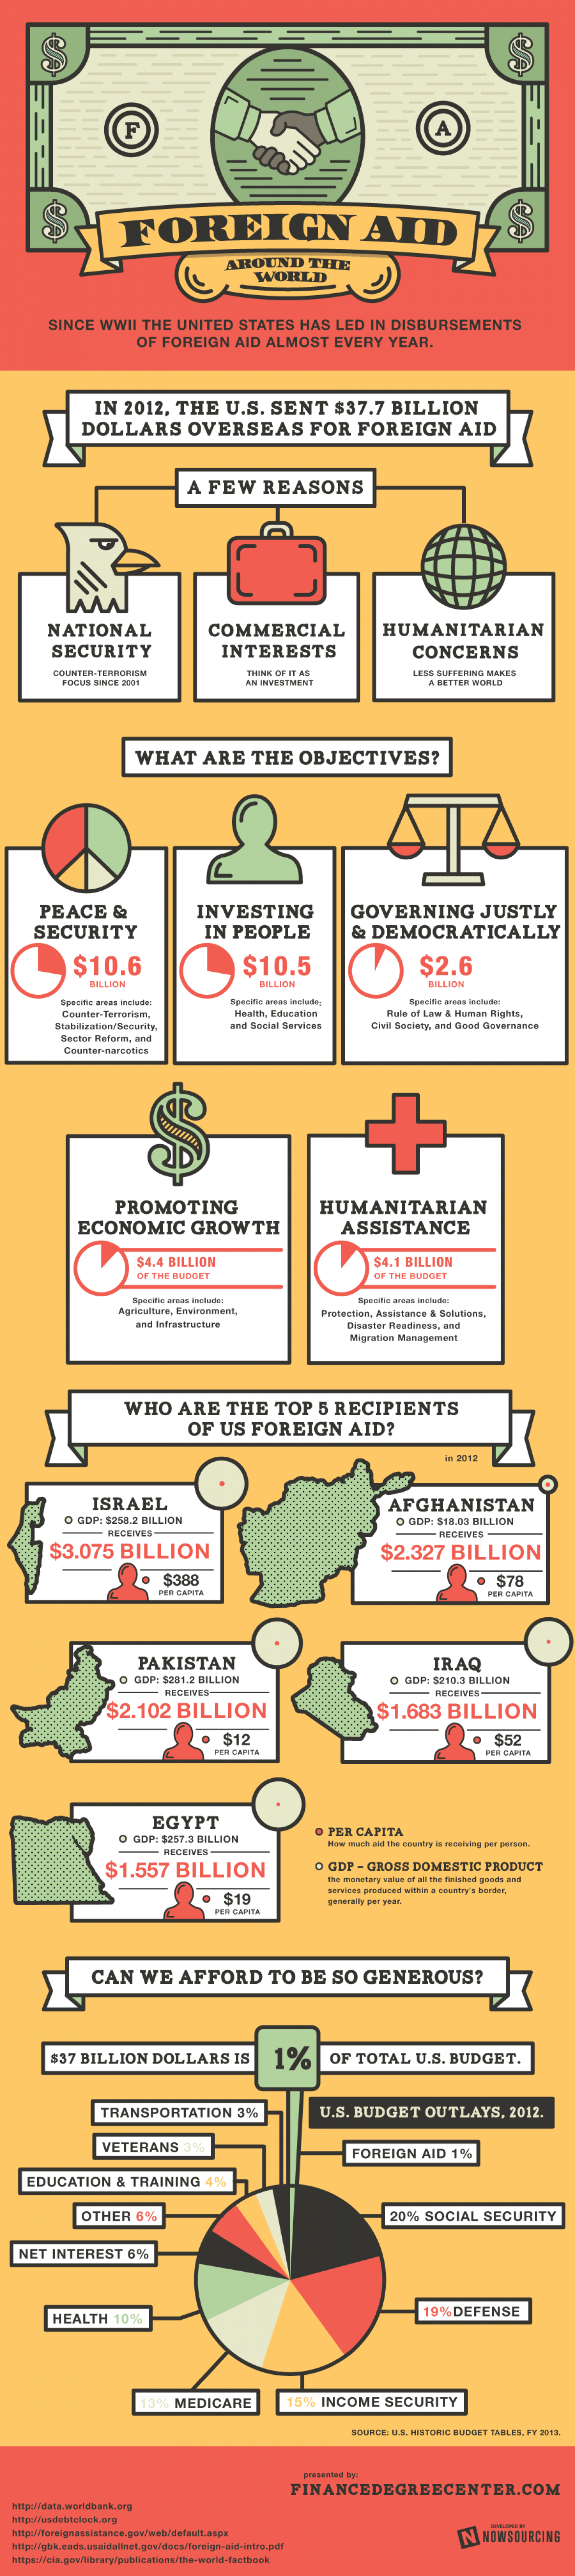 Foreign Aid Around the World Infographic